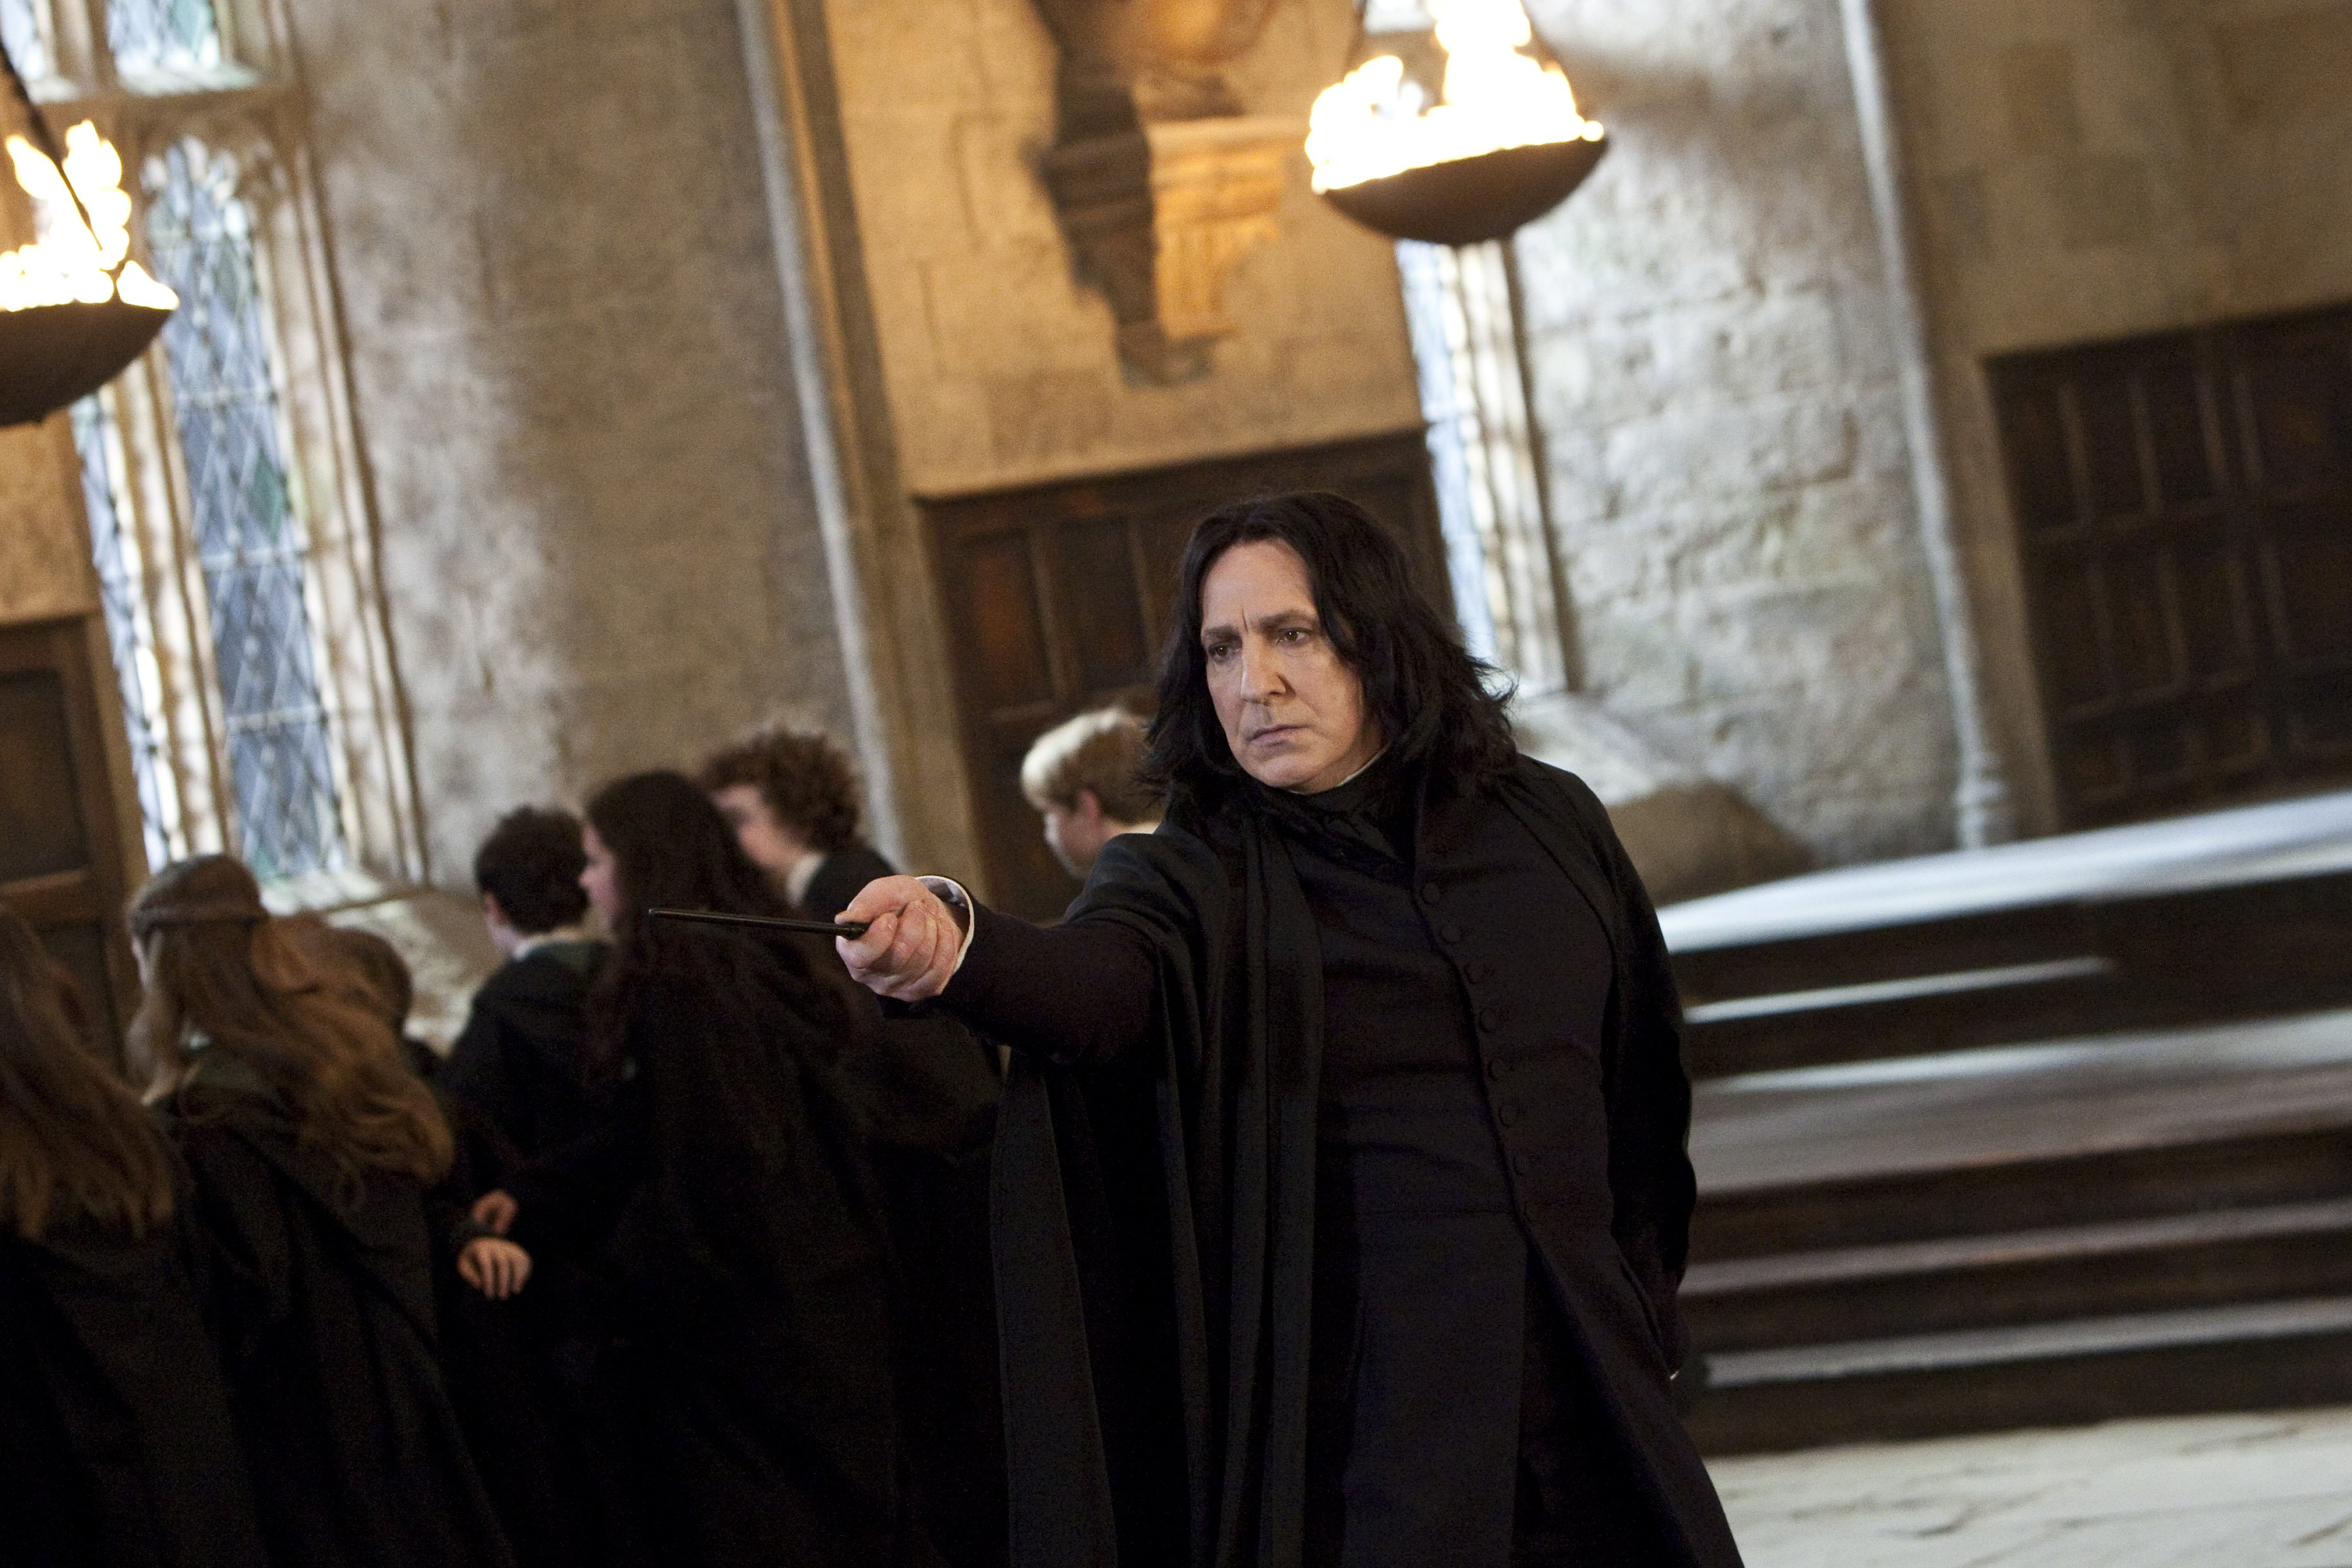 severus snape, movie, harry potter and the deathly hallows: part 2, harry potter